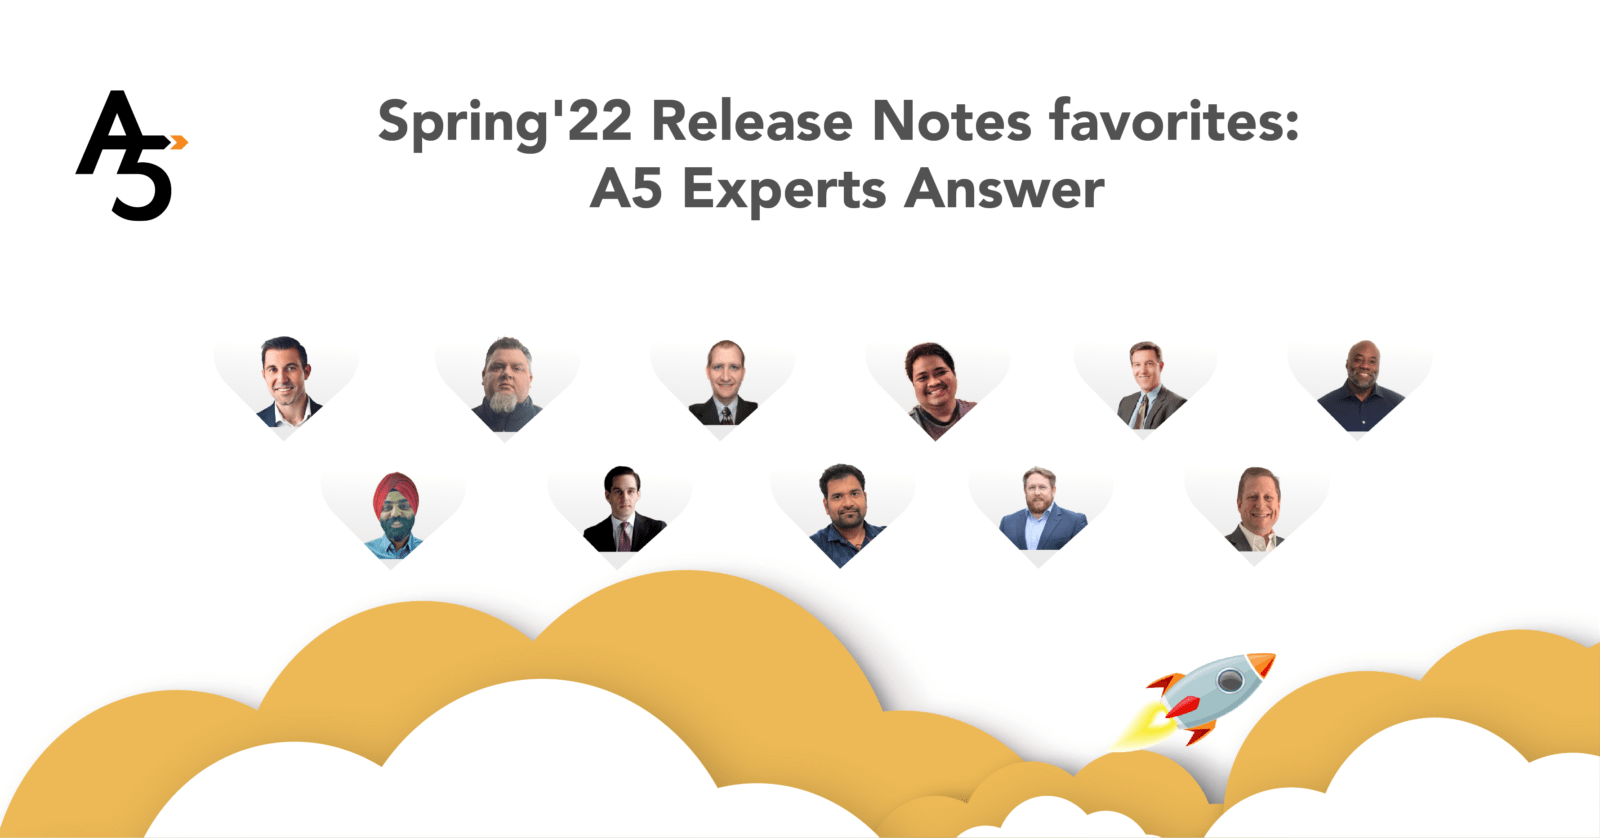 Spring'22 Release Notes Favorites: A5 Experts Answer